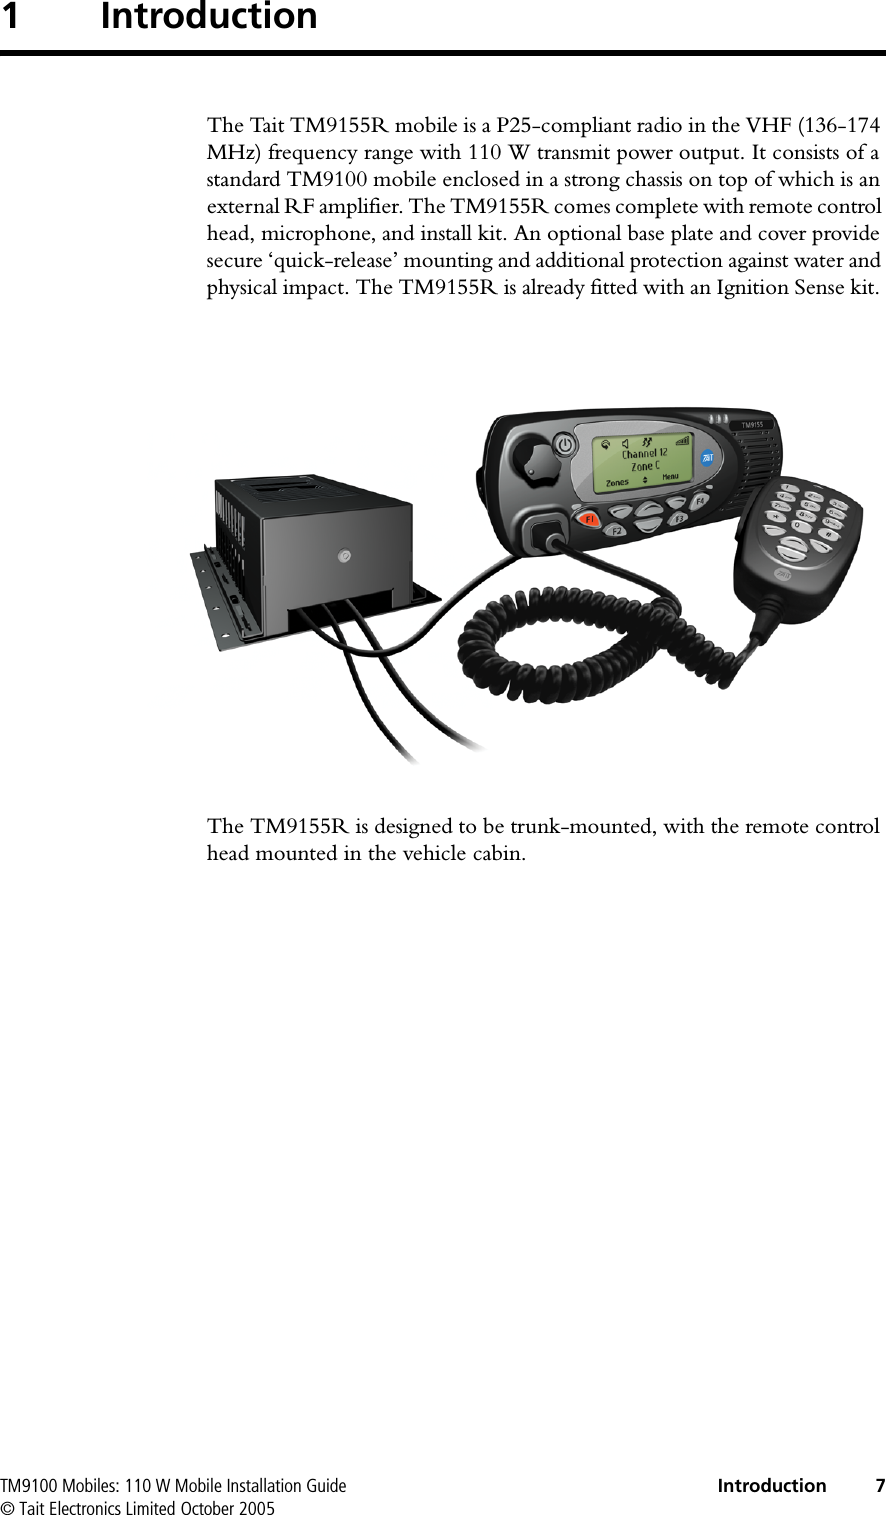  TM9100 Mobiles: 110 W Mobile Installation Guide Introduction 7© Tait Electronics Limited October 20051 IntroductionThe Tait TM9155R mobile is a P25-compliant radio in the VHF (136-174 MHz) frequency range with 110 W transmit power output. It consists of a standard TM9100 mobile enclosed in a strong chassis on top of which is an external RF amplifier. The TM9155R comes complete with remote control head, microphone, and install kit. An optional base plate and cover provide secure ‘quick-release’ mounting and additional protection against water and physical impact. The TM9155R is already fitted with an Ignition Sense kit. The TM9155R is designed to be trunk-mounted, with the remote control head mounted in the vehicle cabin.